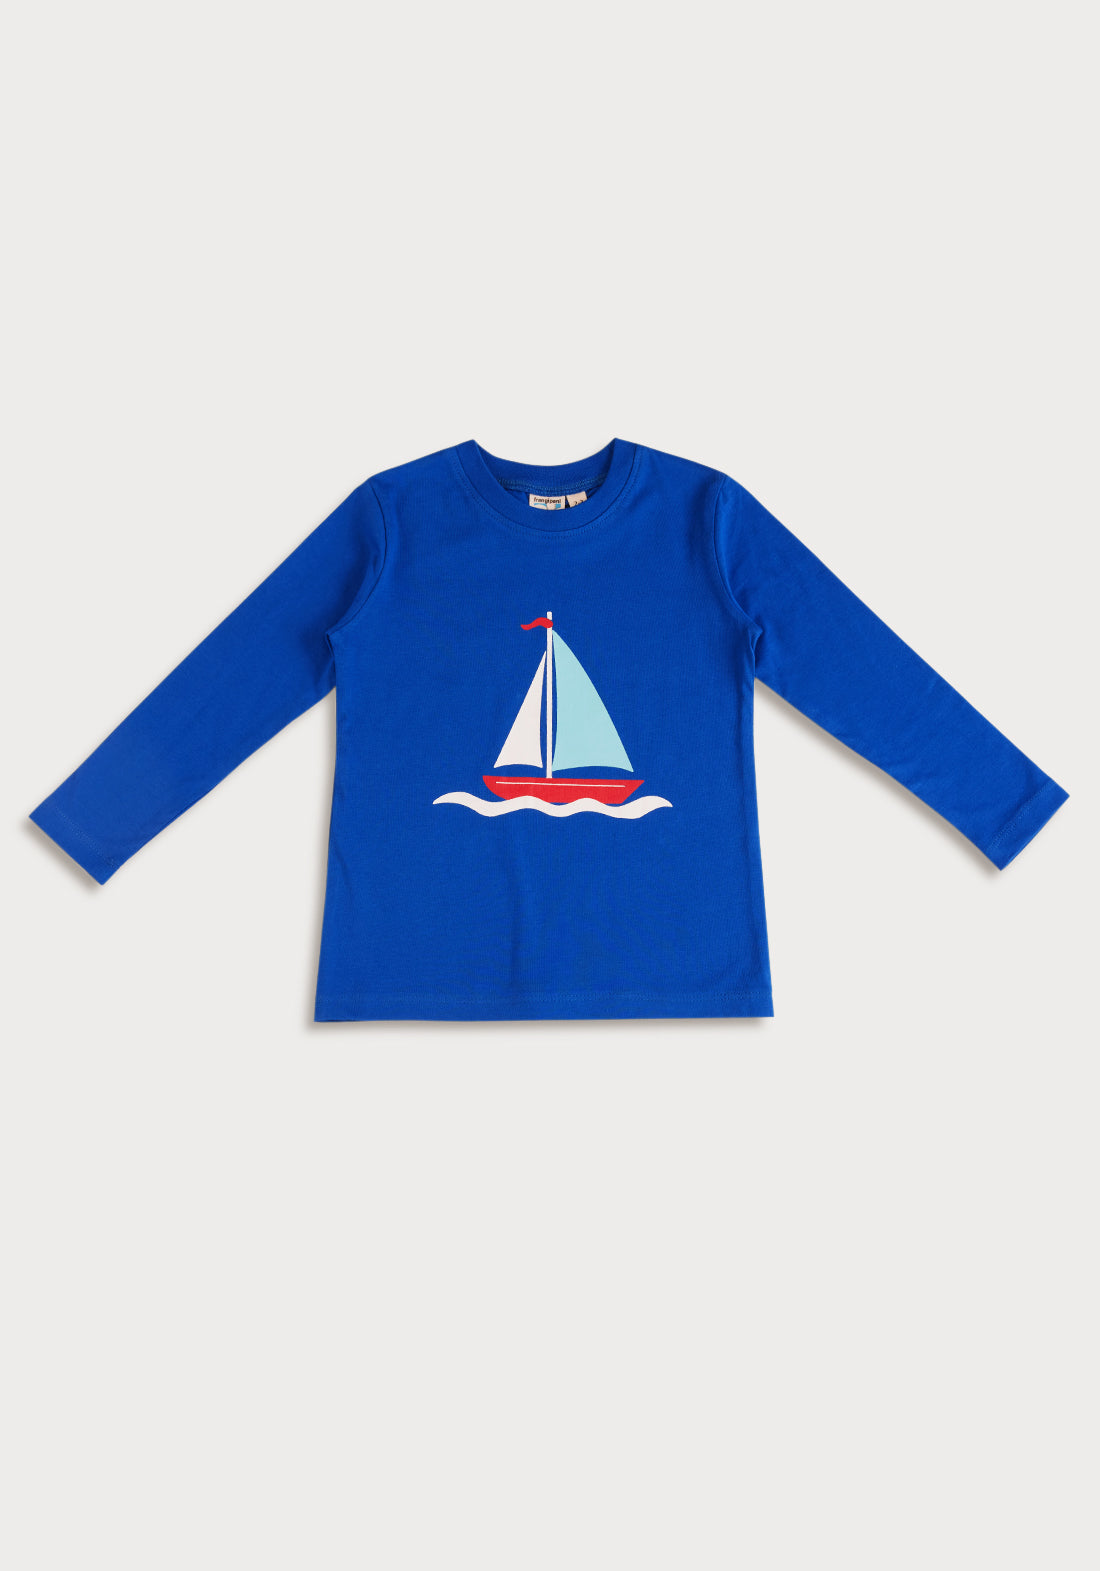 SOLID BLUE WITH BOAT PLACEMENT PRINT TEE